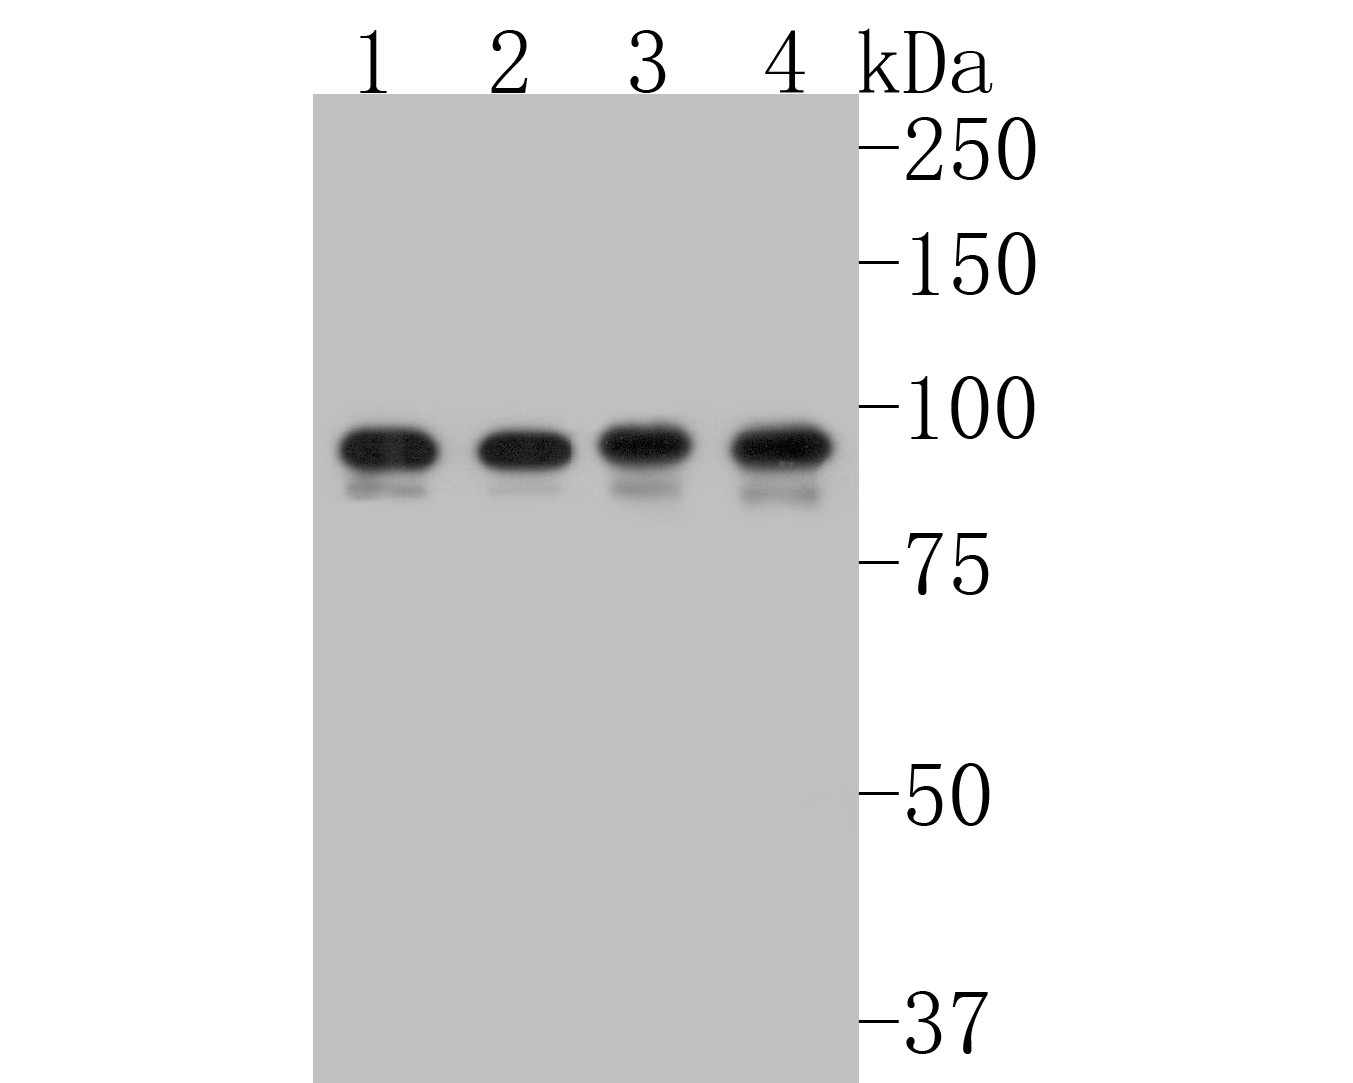 Western blot analysis of Phospho-STAT3(S727) on different lysates. Proteins were transferred to a PVDF membrane and blocked with 5% BSA in PBS for 1 hour at room temperature. The primary antibody (ET1607-39, 1/500) was used in 5% BSA at room temperature for 2 hours. Goat Anti-Rabbit IgG - HRP Secondary Antibody (HA1001) at 1:5,000 dilution was used for 1 hour at room temperature.<br />
<br />
Positive control: <br />
Lane 1: Hela cell lysate<br />
Lane 2: A431 cell lysate<br />
Lane 3: NIH/3T3 cell lysate<br />
Lane 4: Jurkat cell lysate